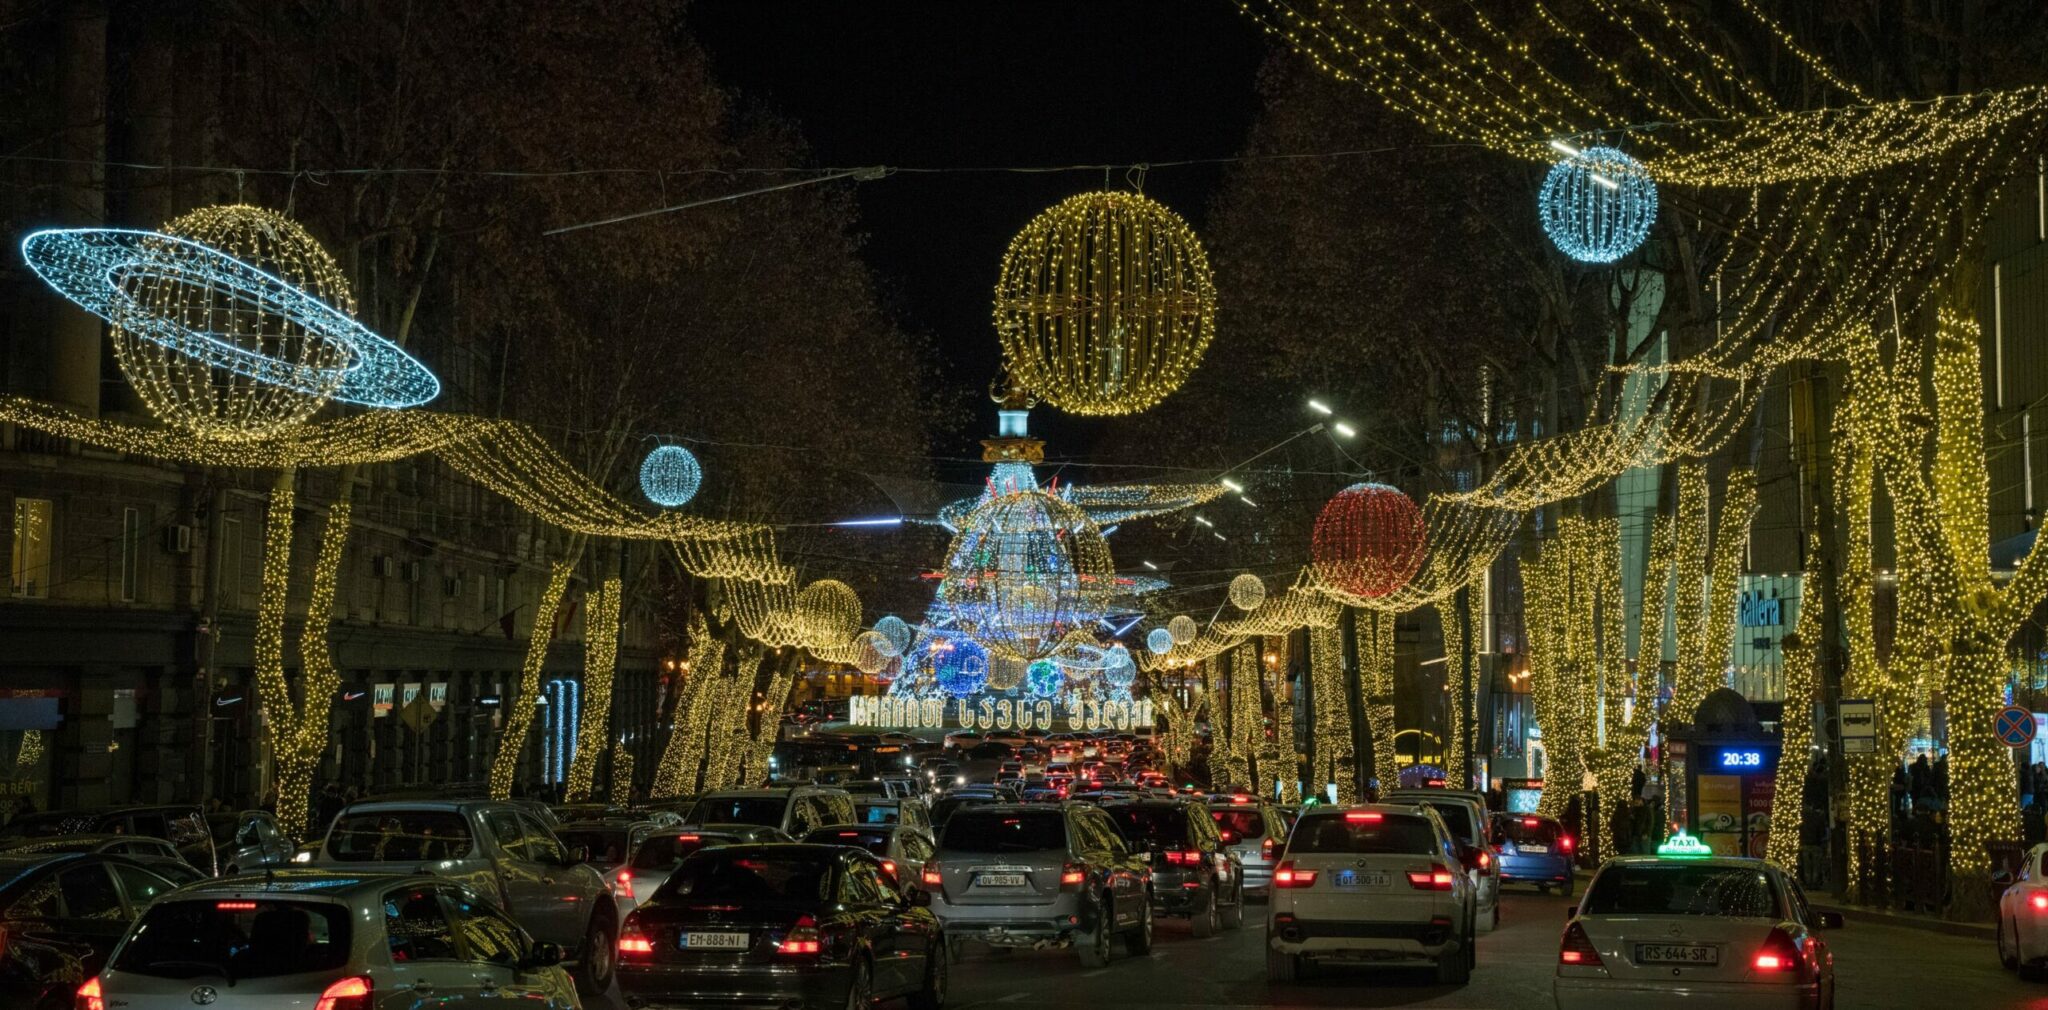 Christmas in Tbilisi - Orthodox Christmas Traditions